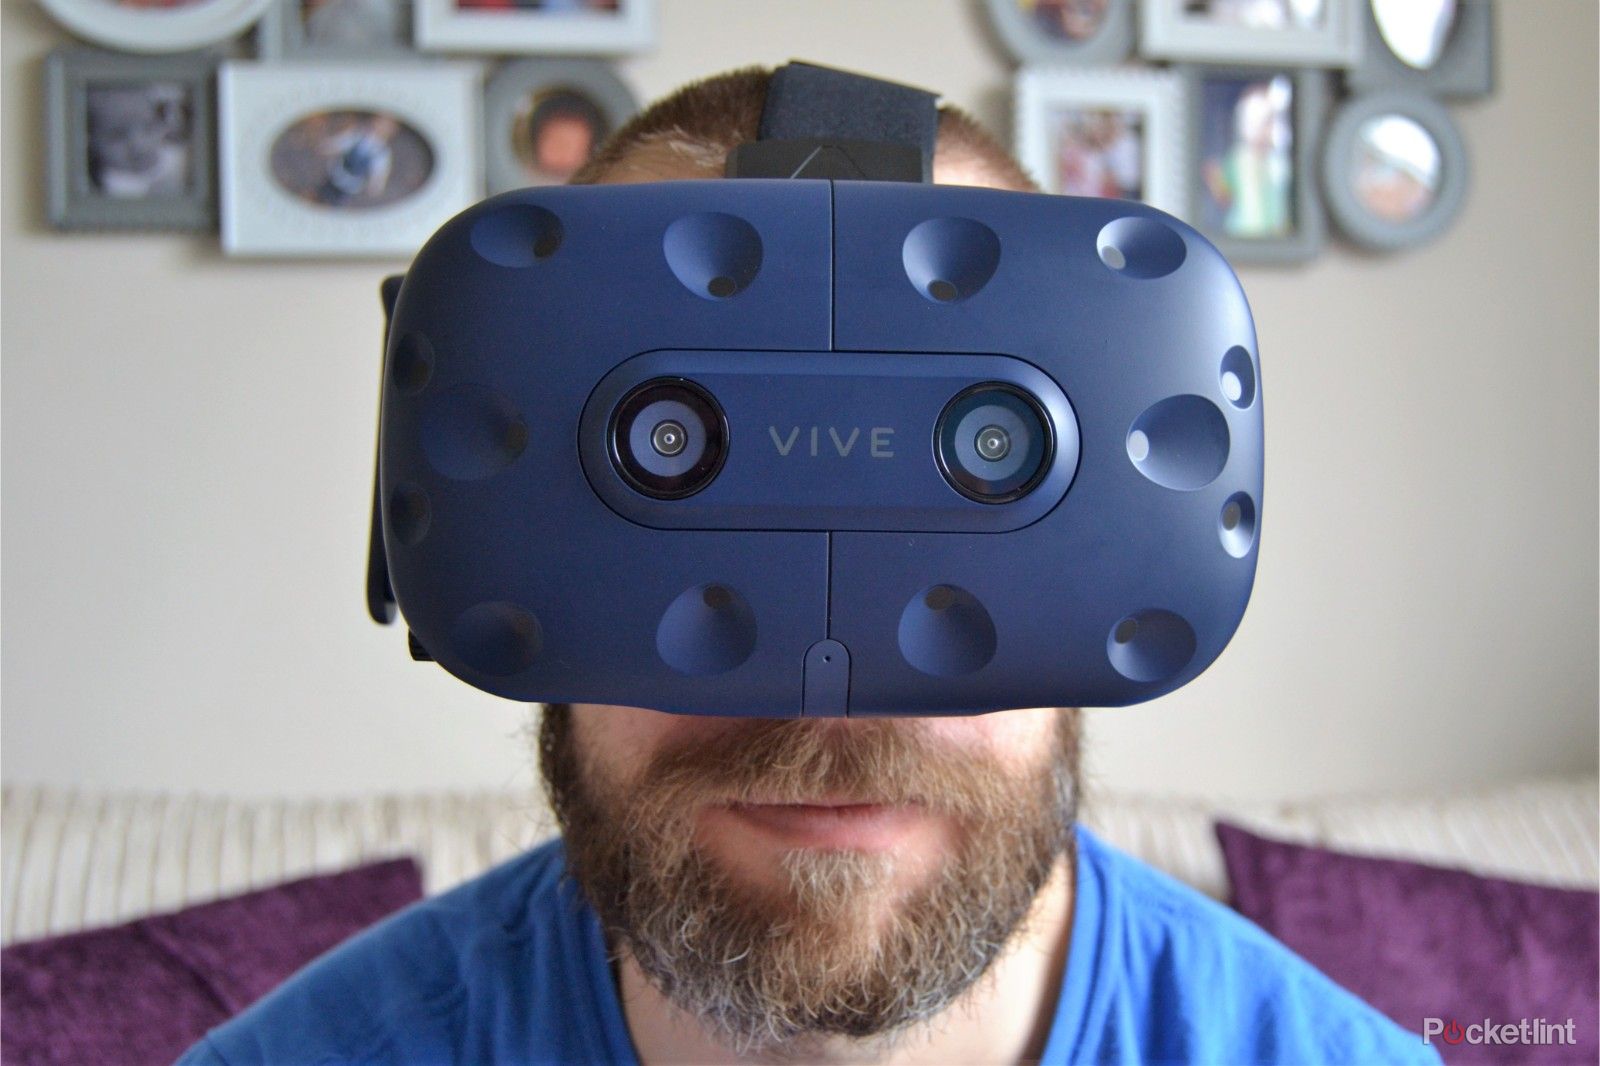 Htc Vive Vs Htc Vive Pro Whats The Difference image 9